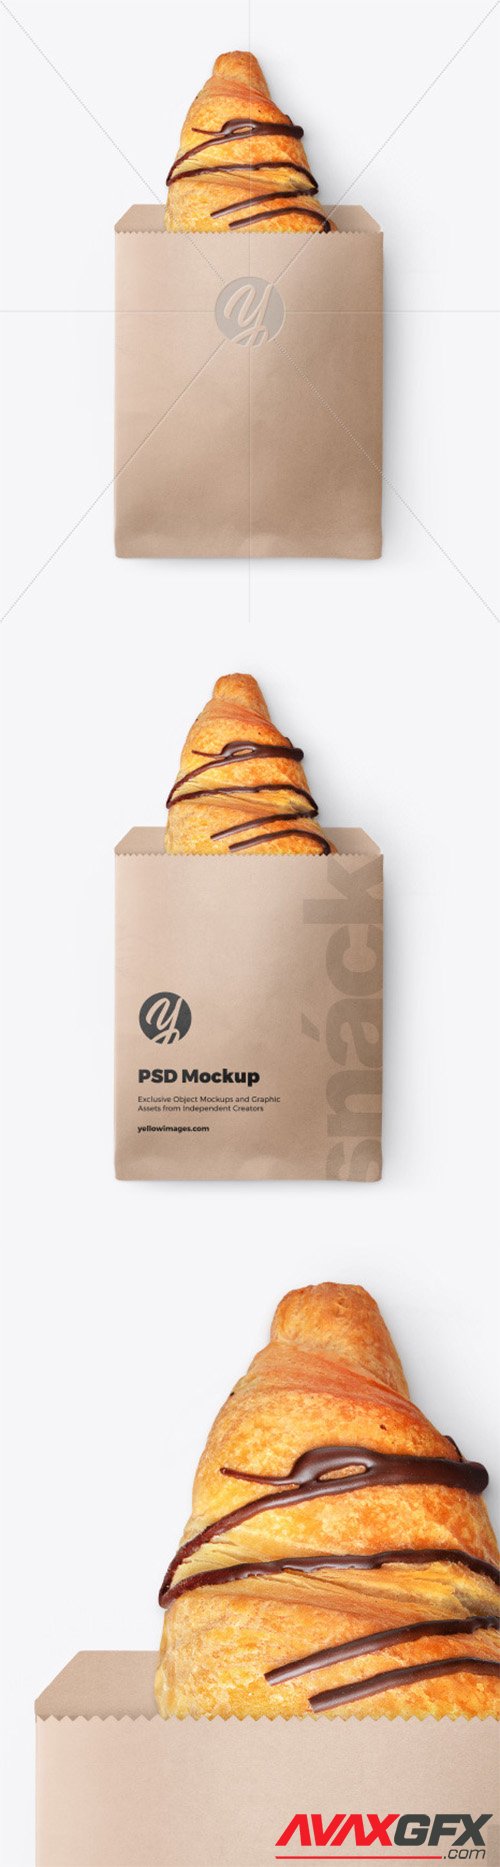 Download 46 Glossy Snack Pack Front View Potoshop Yellowimages Mockups